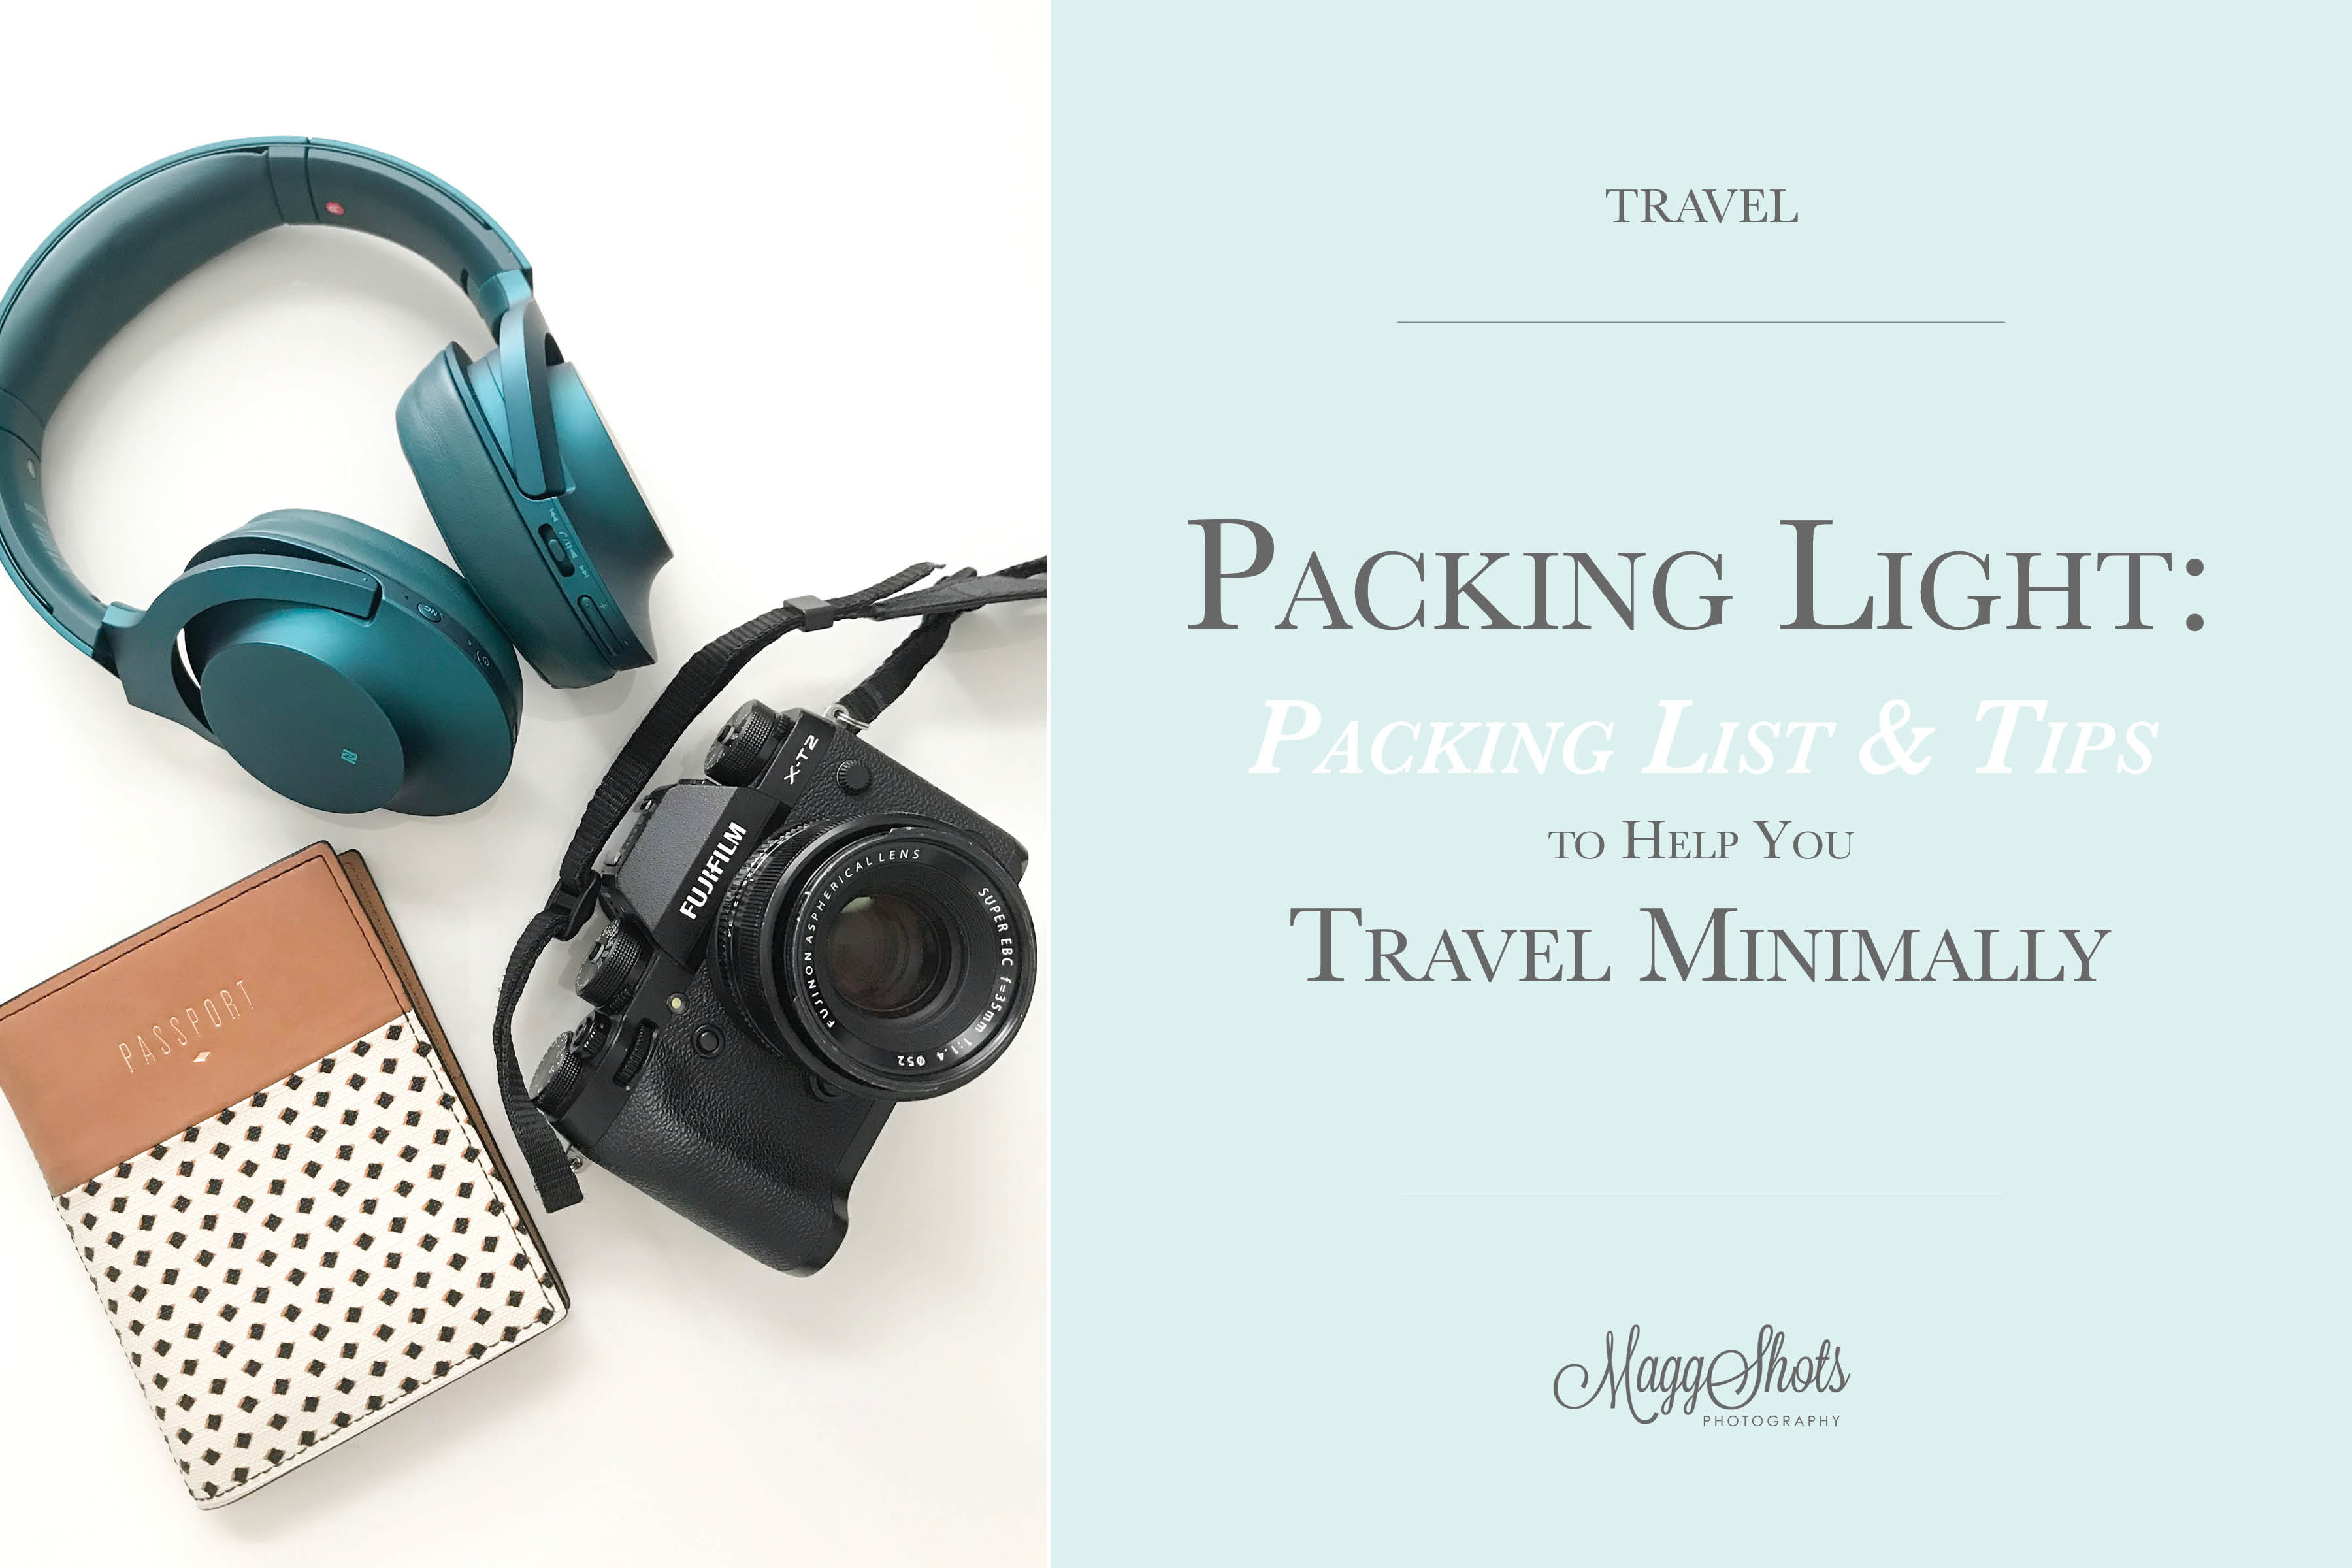 Packing Light: Packing List & Tips to Help You Travel Minimally